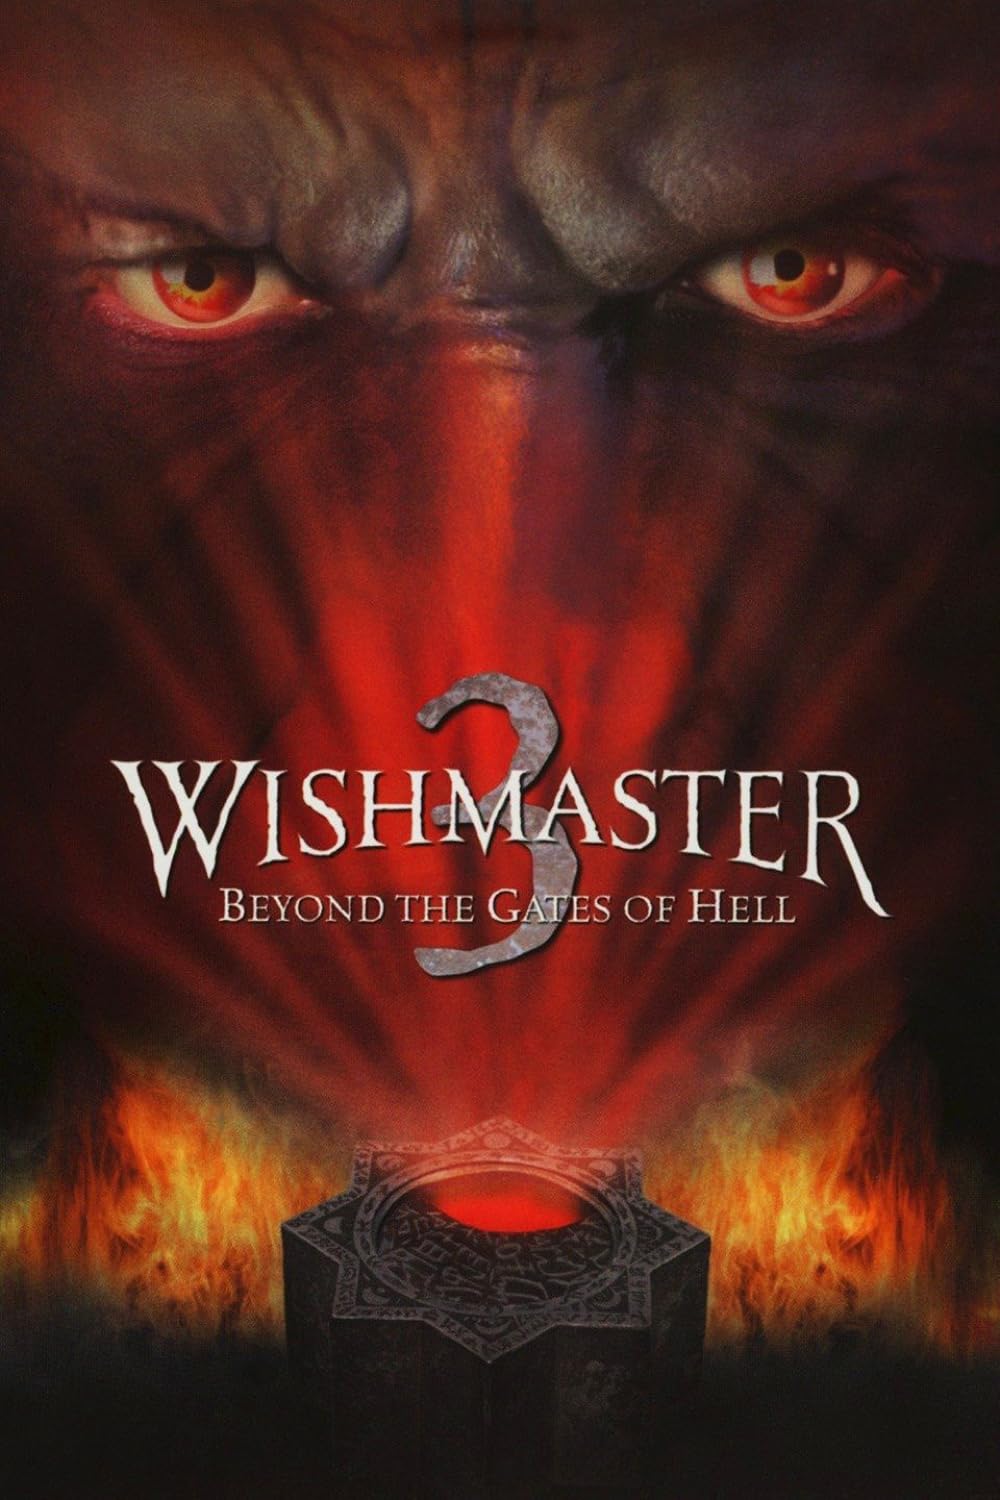 FULL MOVIE: Wishmaster 3: Beyond The Gates of Hell (2001)